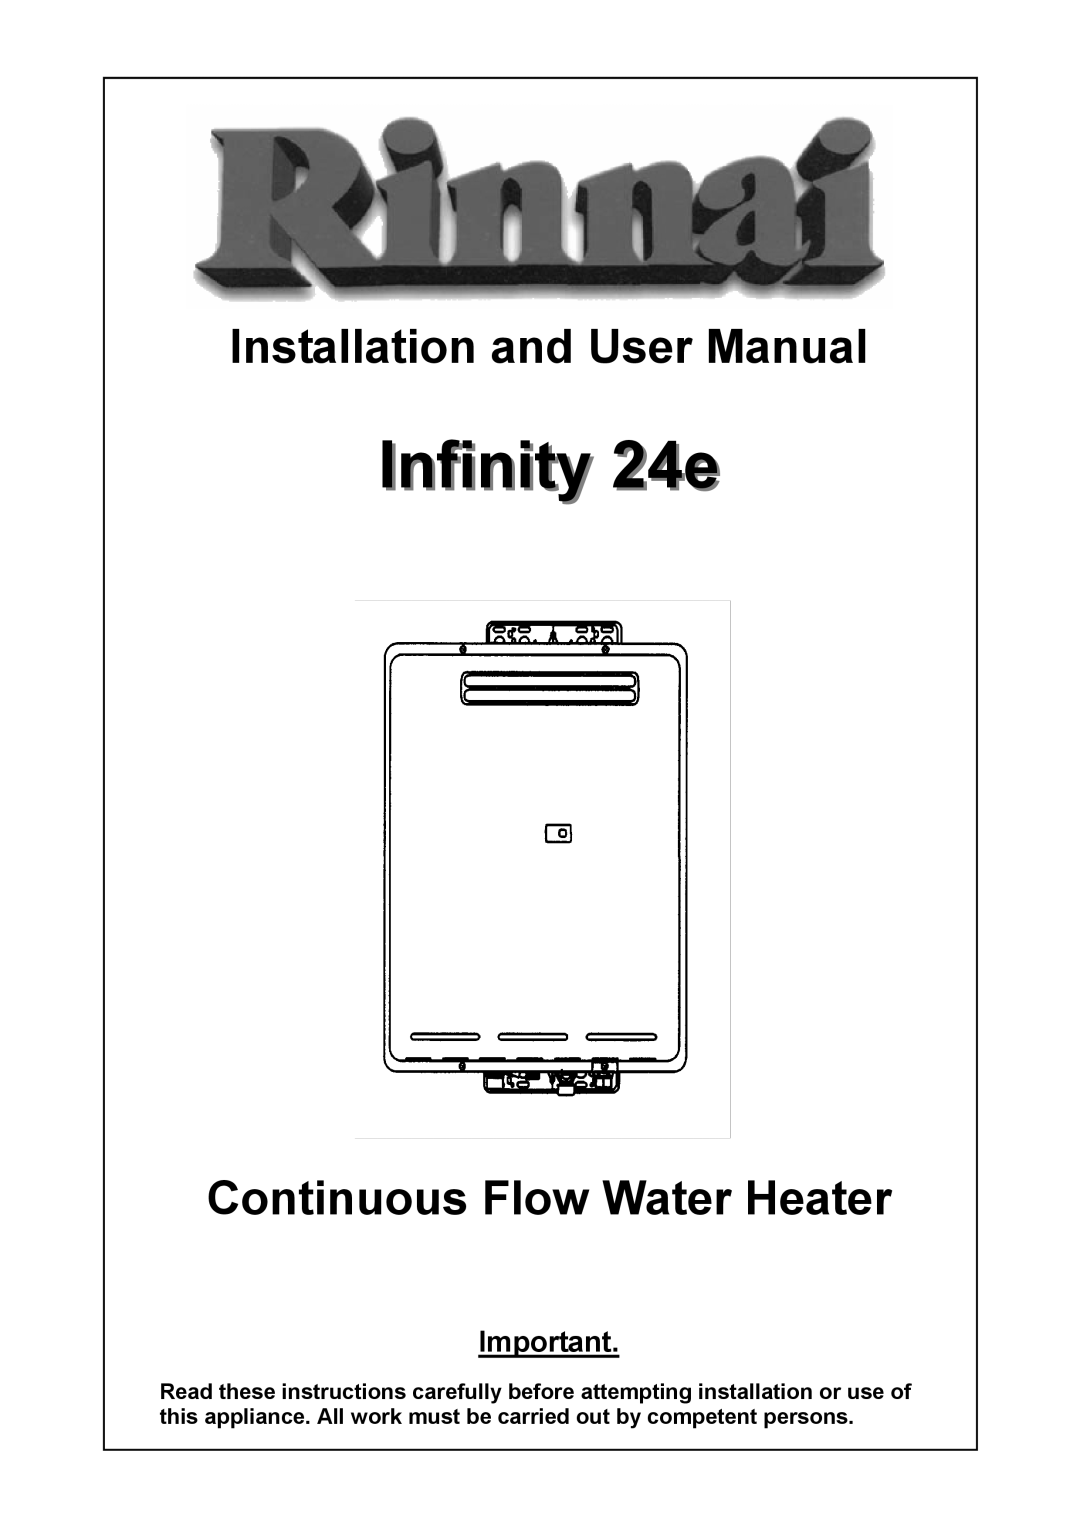 Rinnai user manual Infinity 24e, Continuous Flow Water Heater 